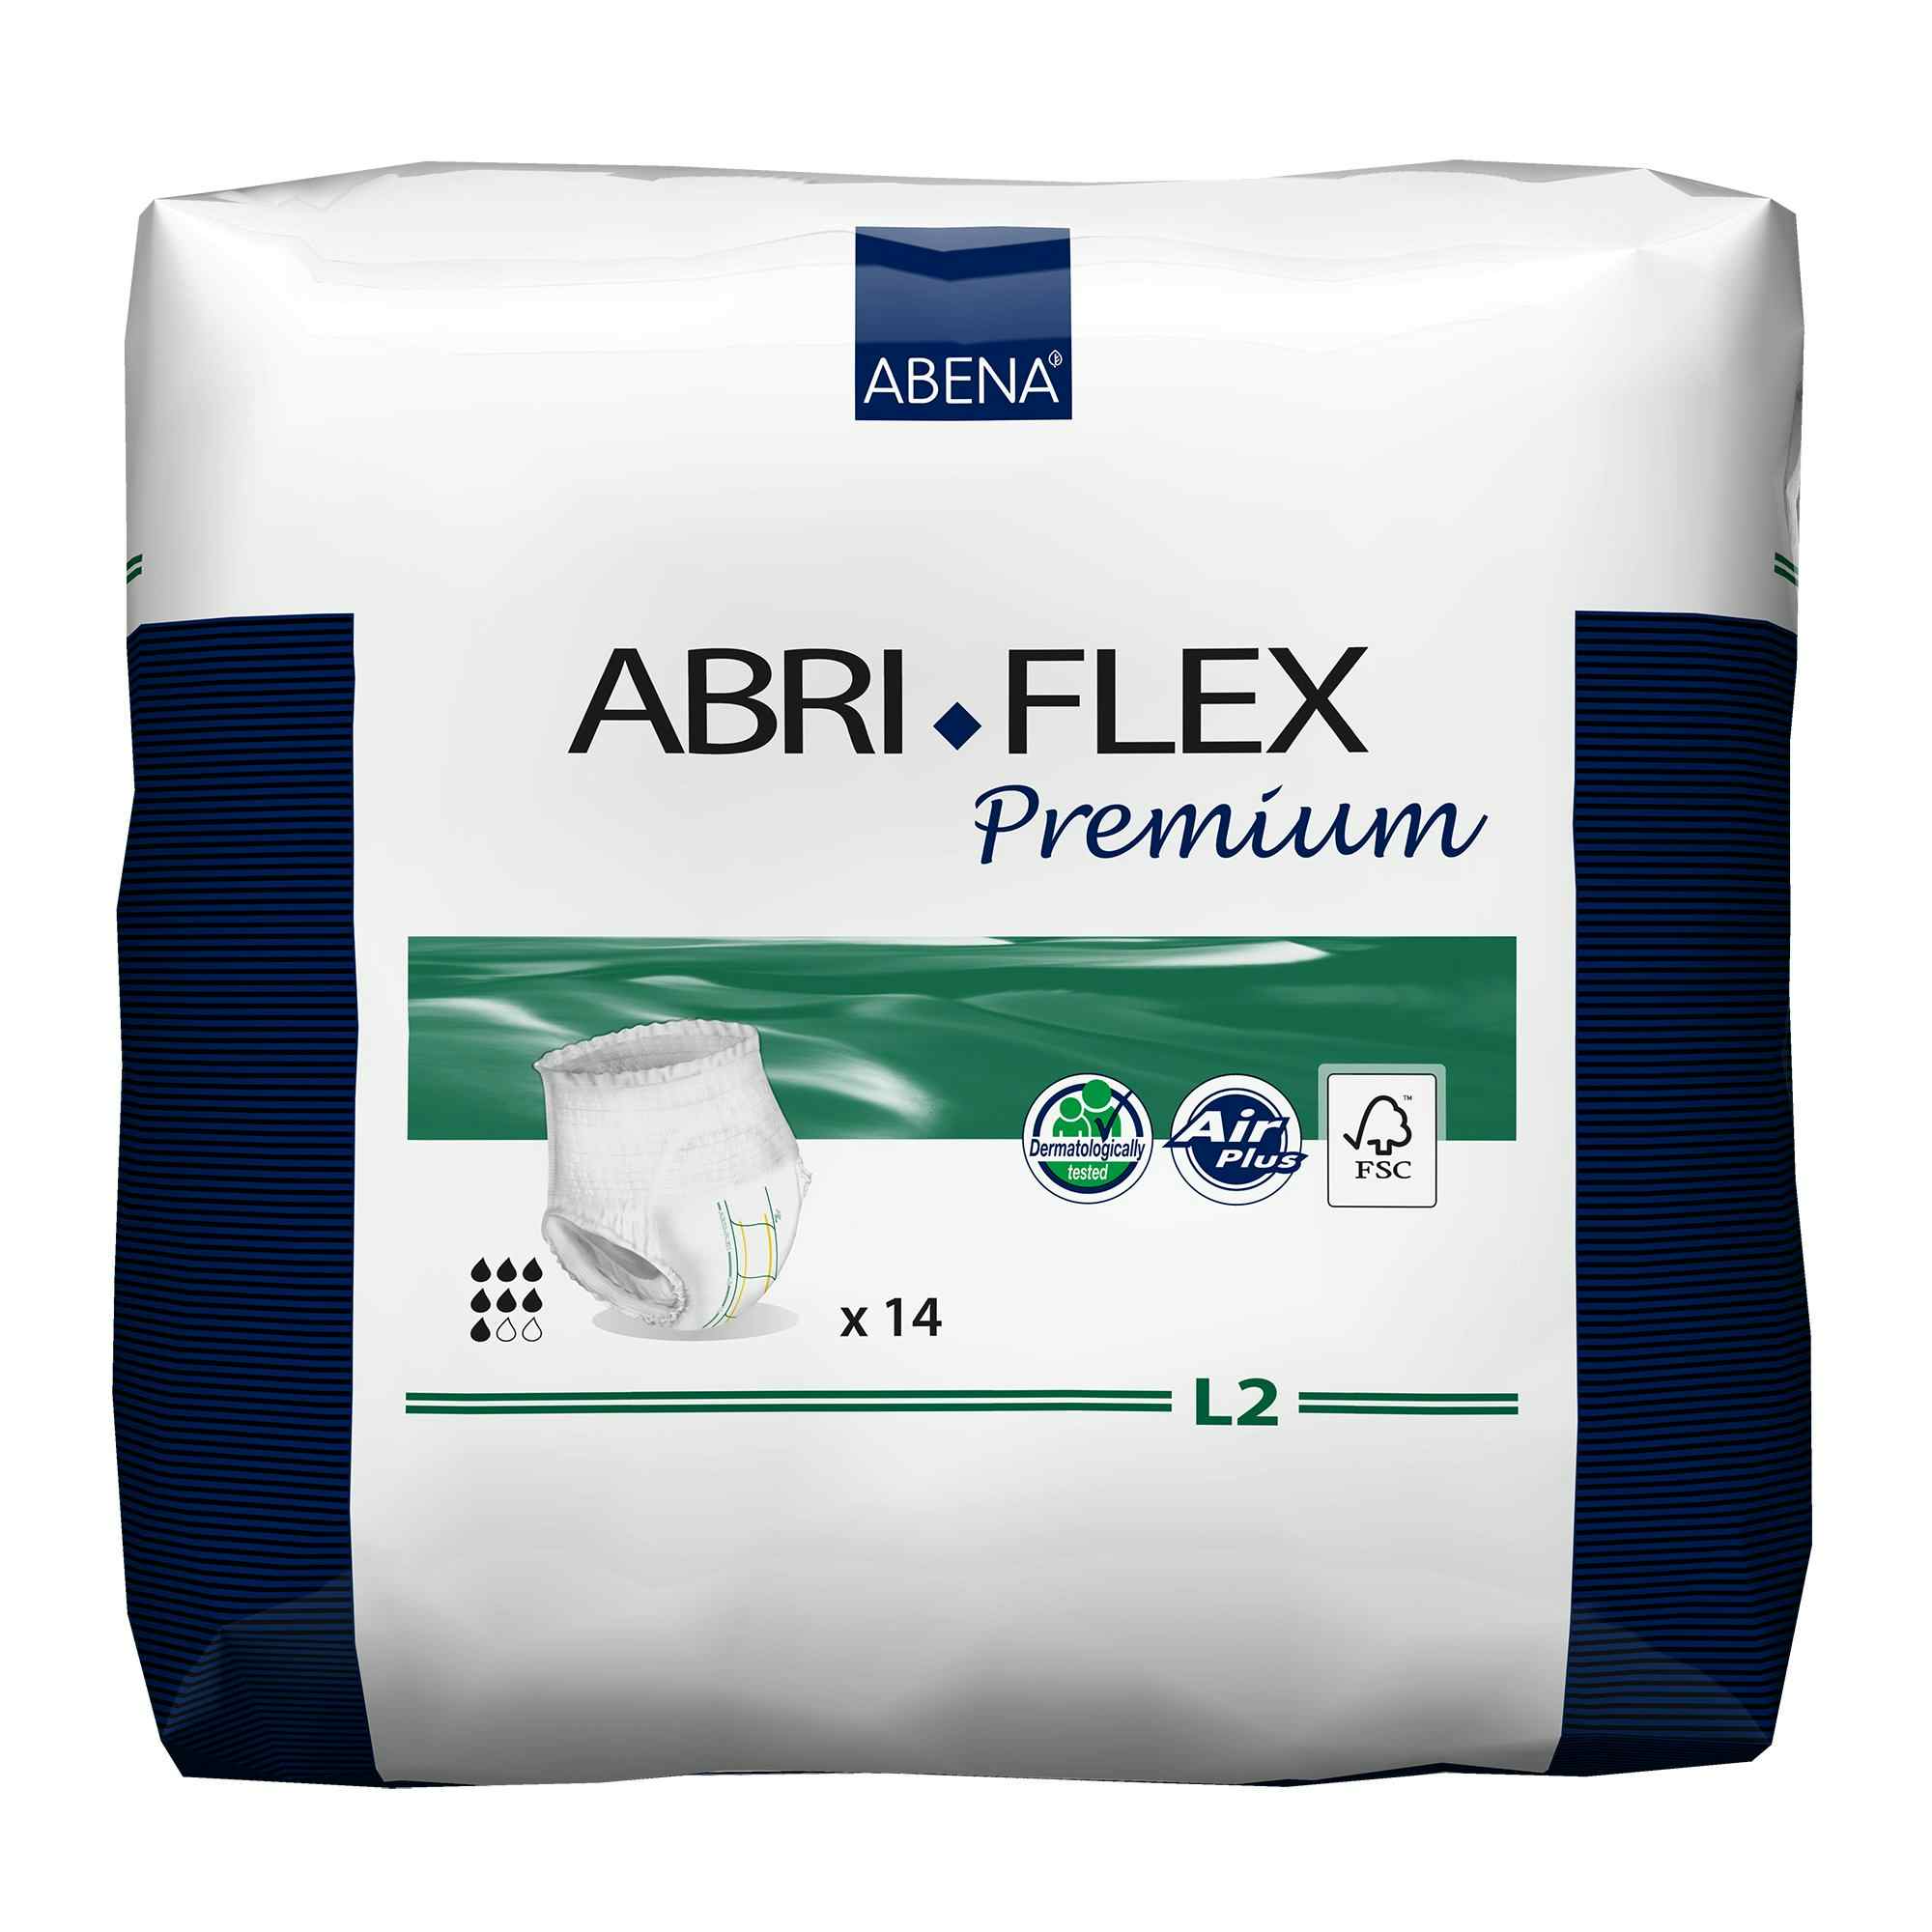 Abri-Flex Premium L2 Unisex Adult Disposable Pull On Diaper with Tear Away Seams, Heavy Absorbency, 41087, Large (40-56") - Bag of 14